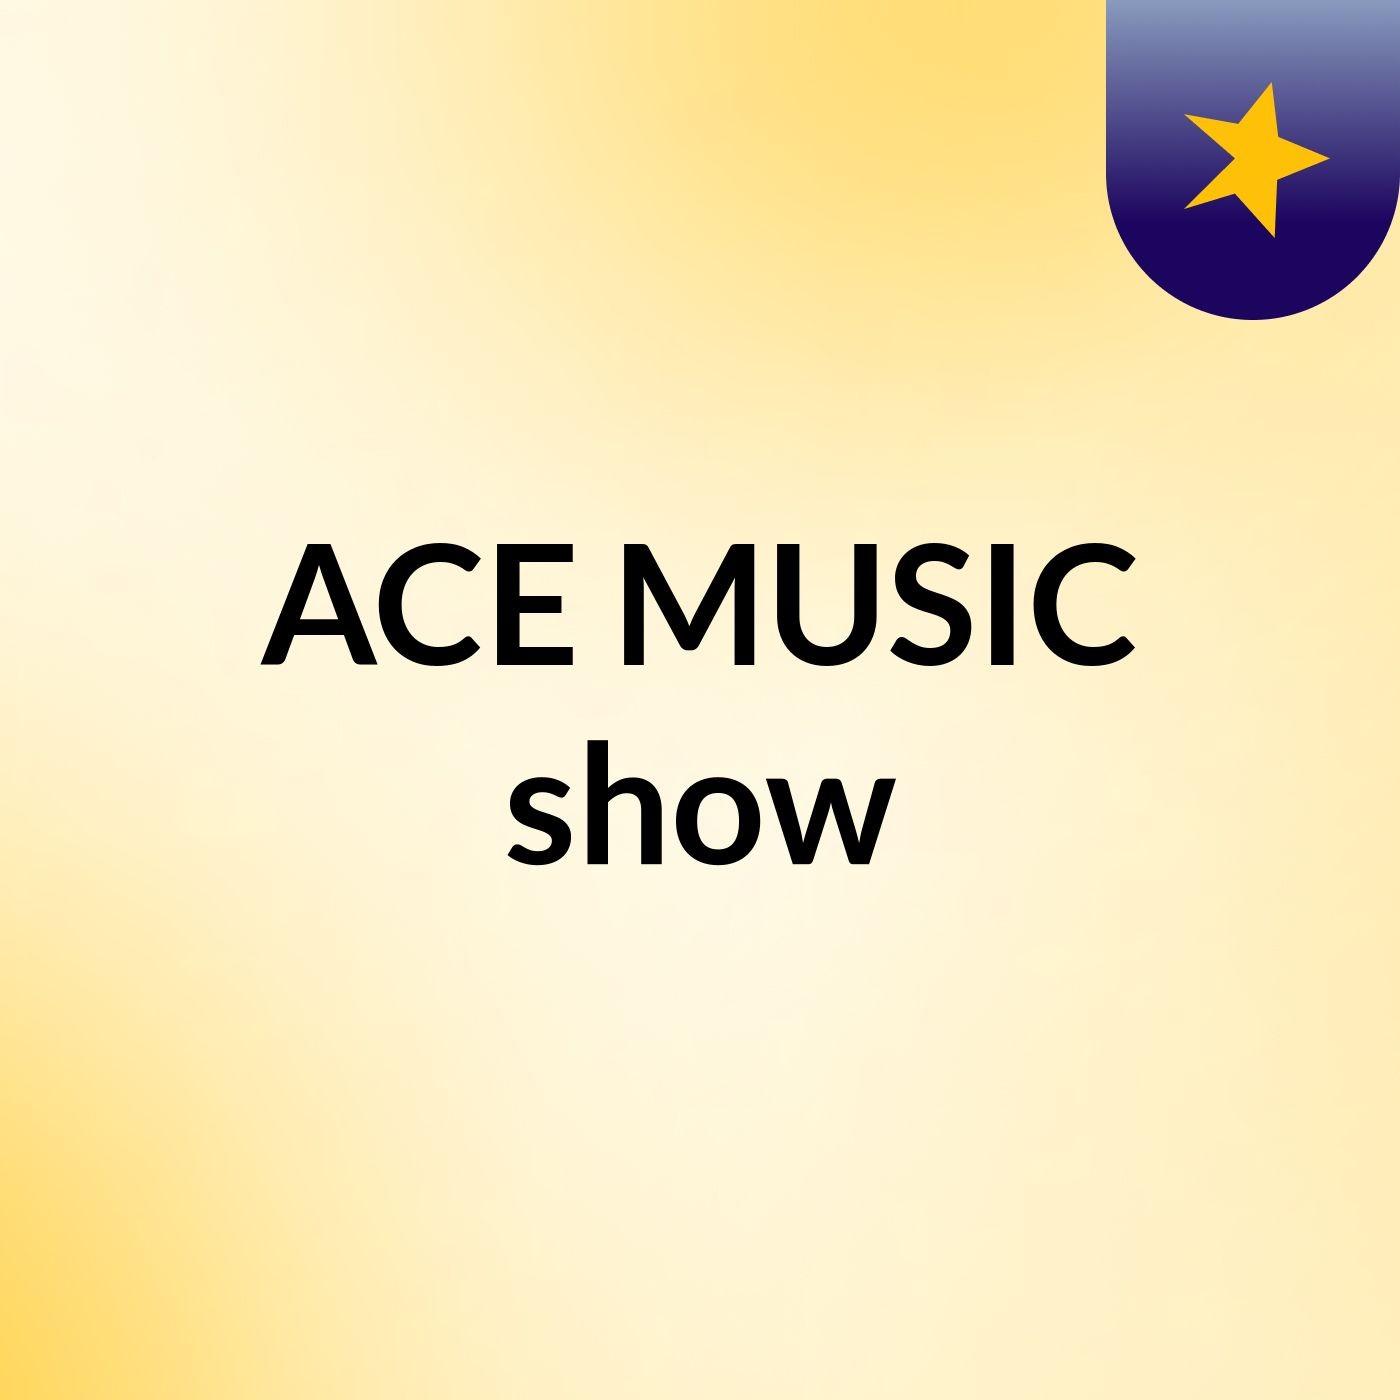 ACE MUSIC show